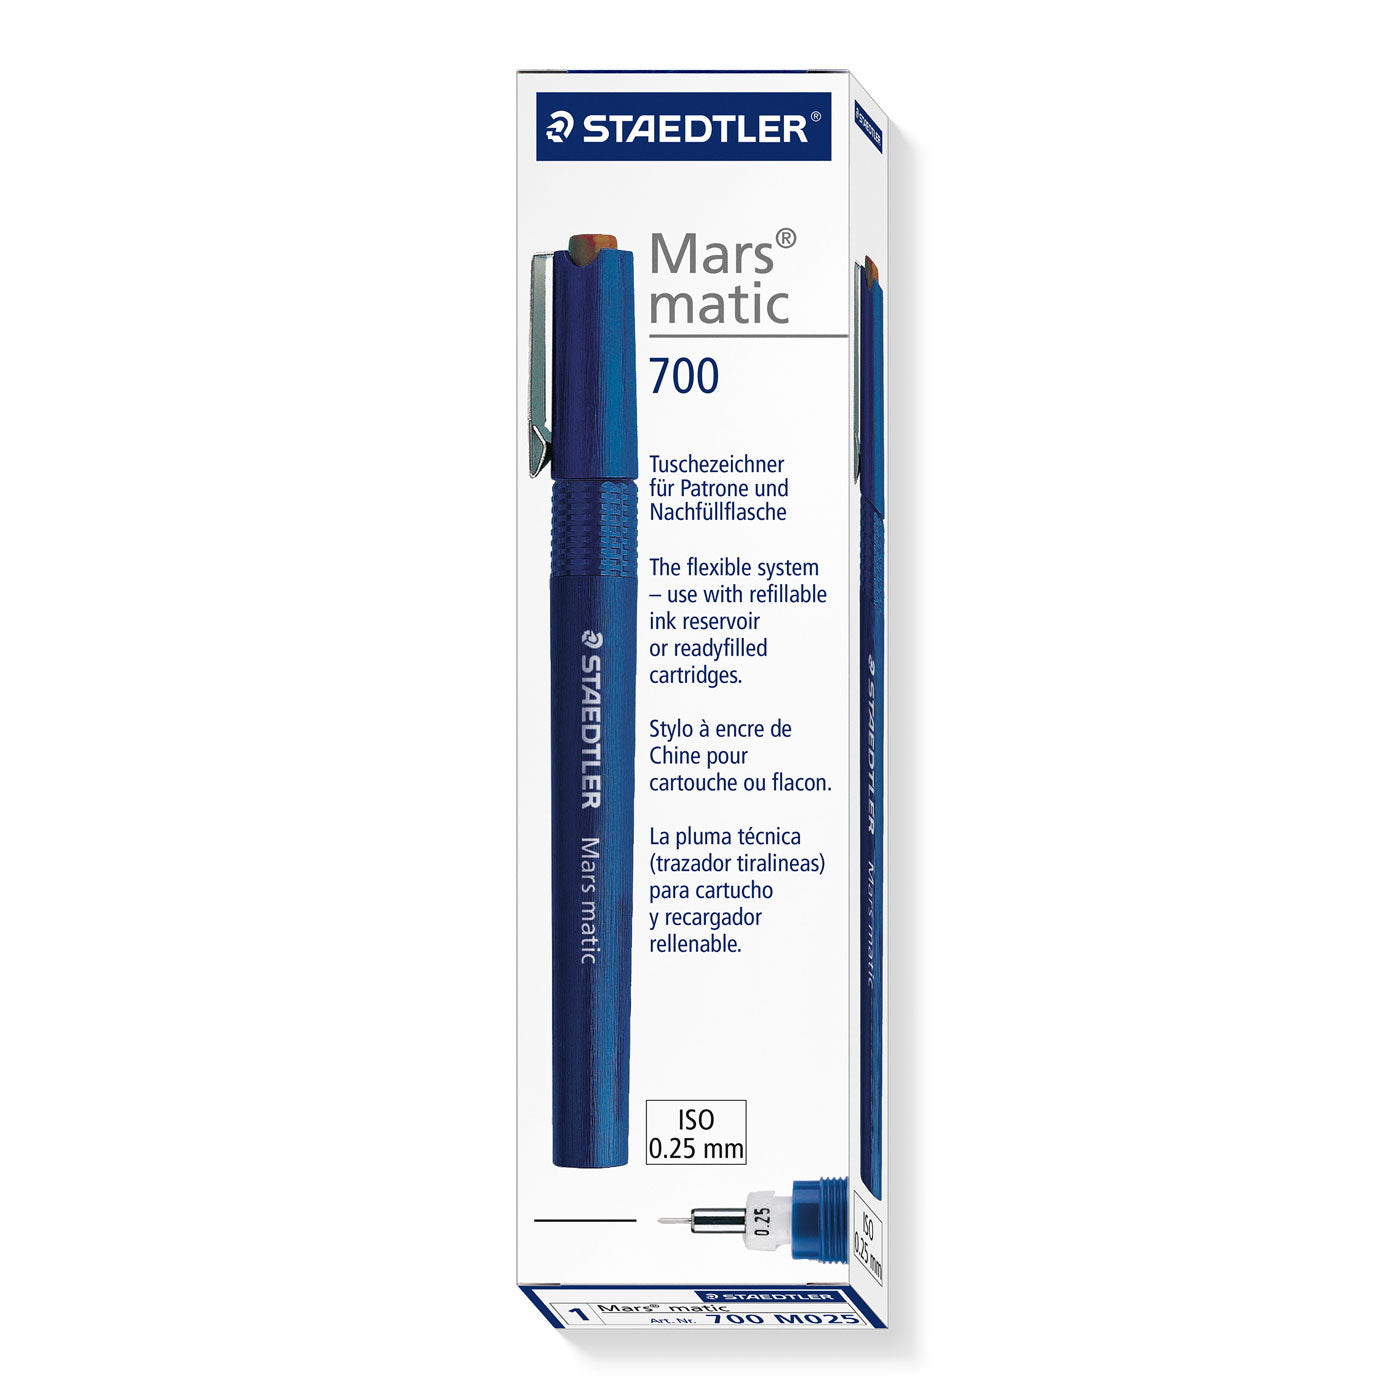 Staedtler Mars Matic 700 M018 Technical Drawing Pen 0.25mm Box